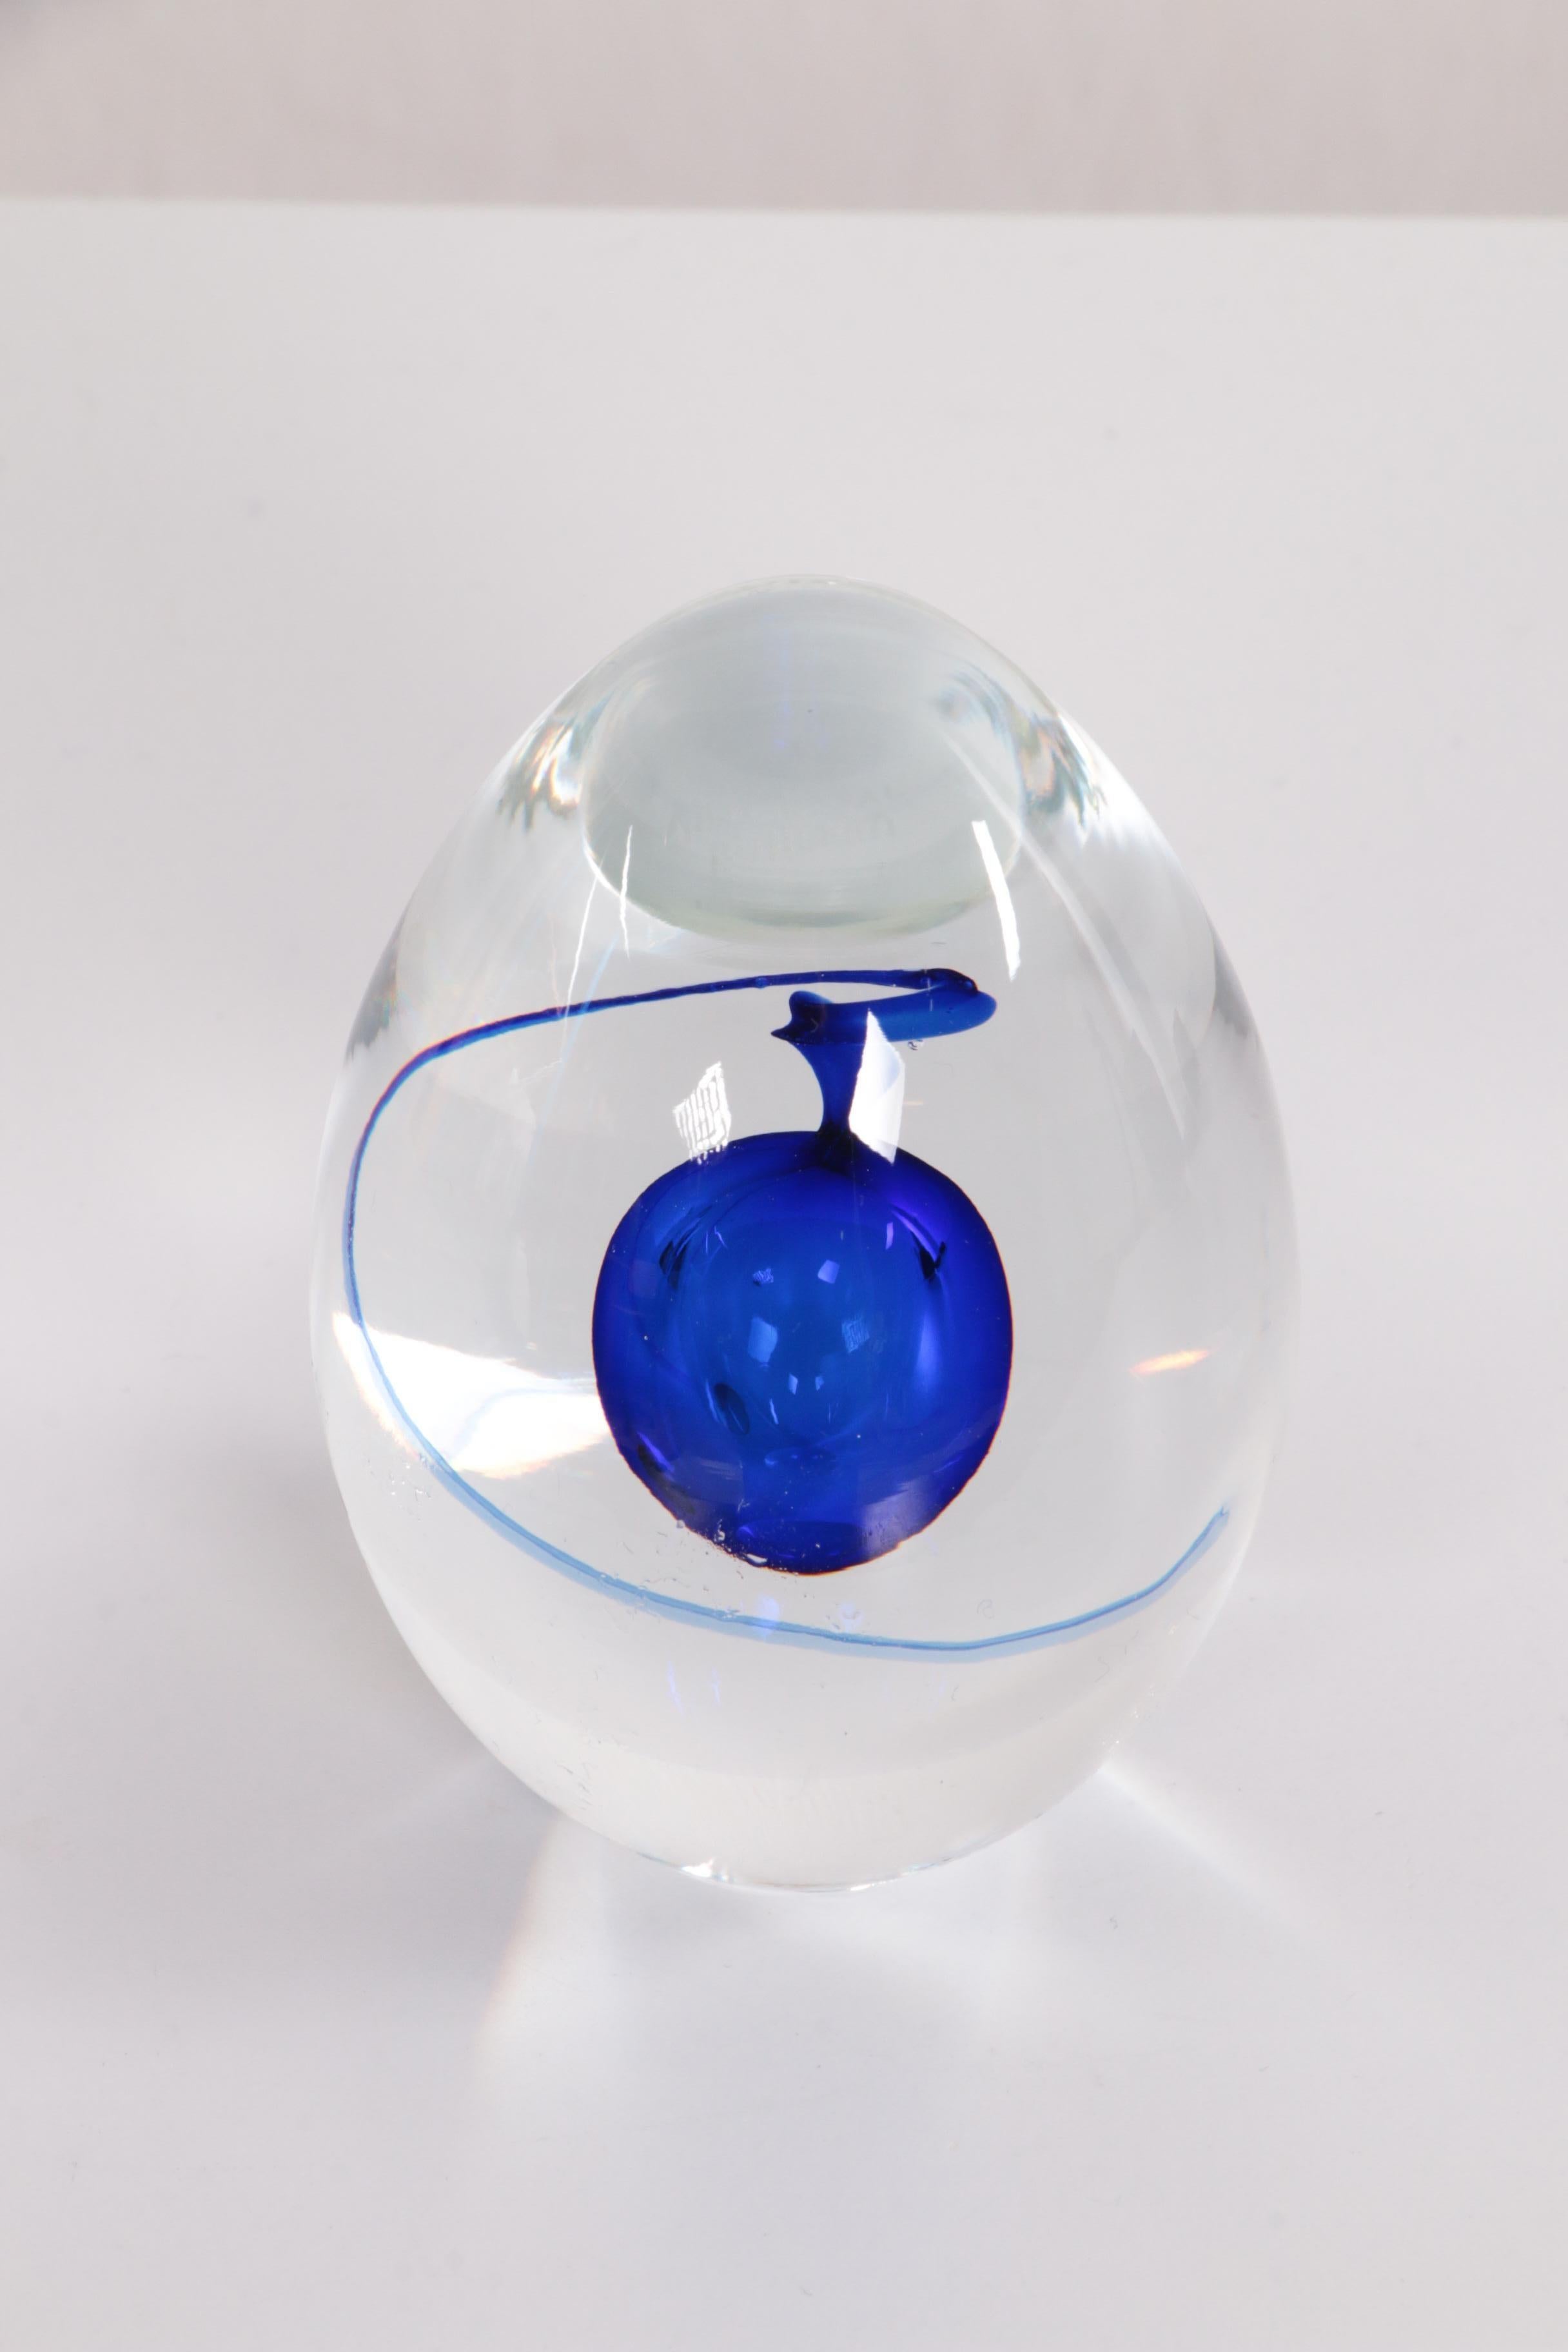 Paperweight Egg Shape with Blue Drop Artcristal Bohemia For Sale 4